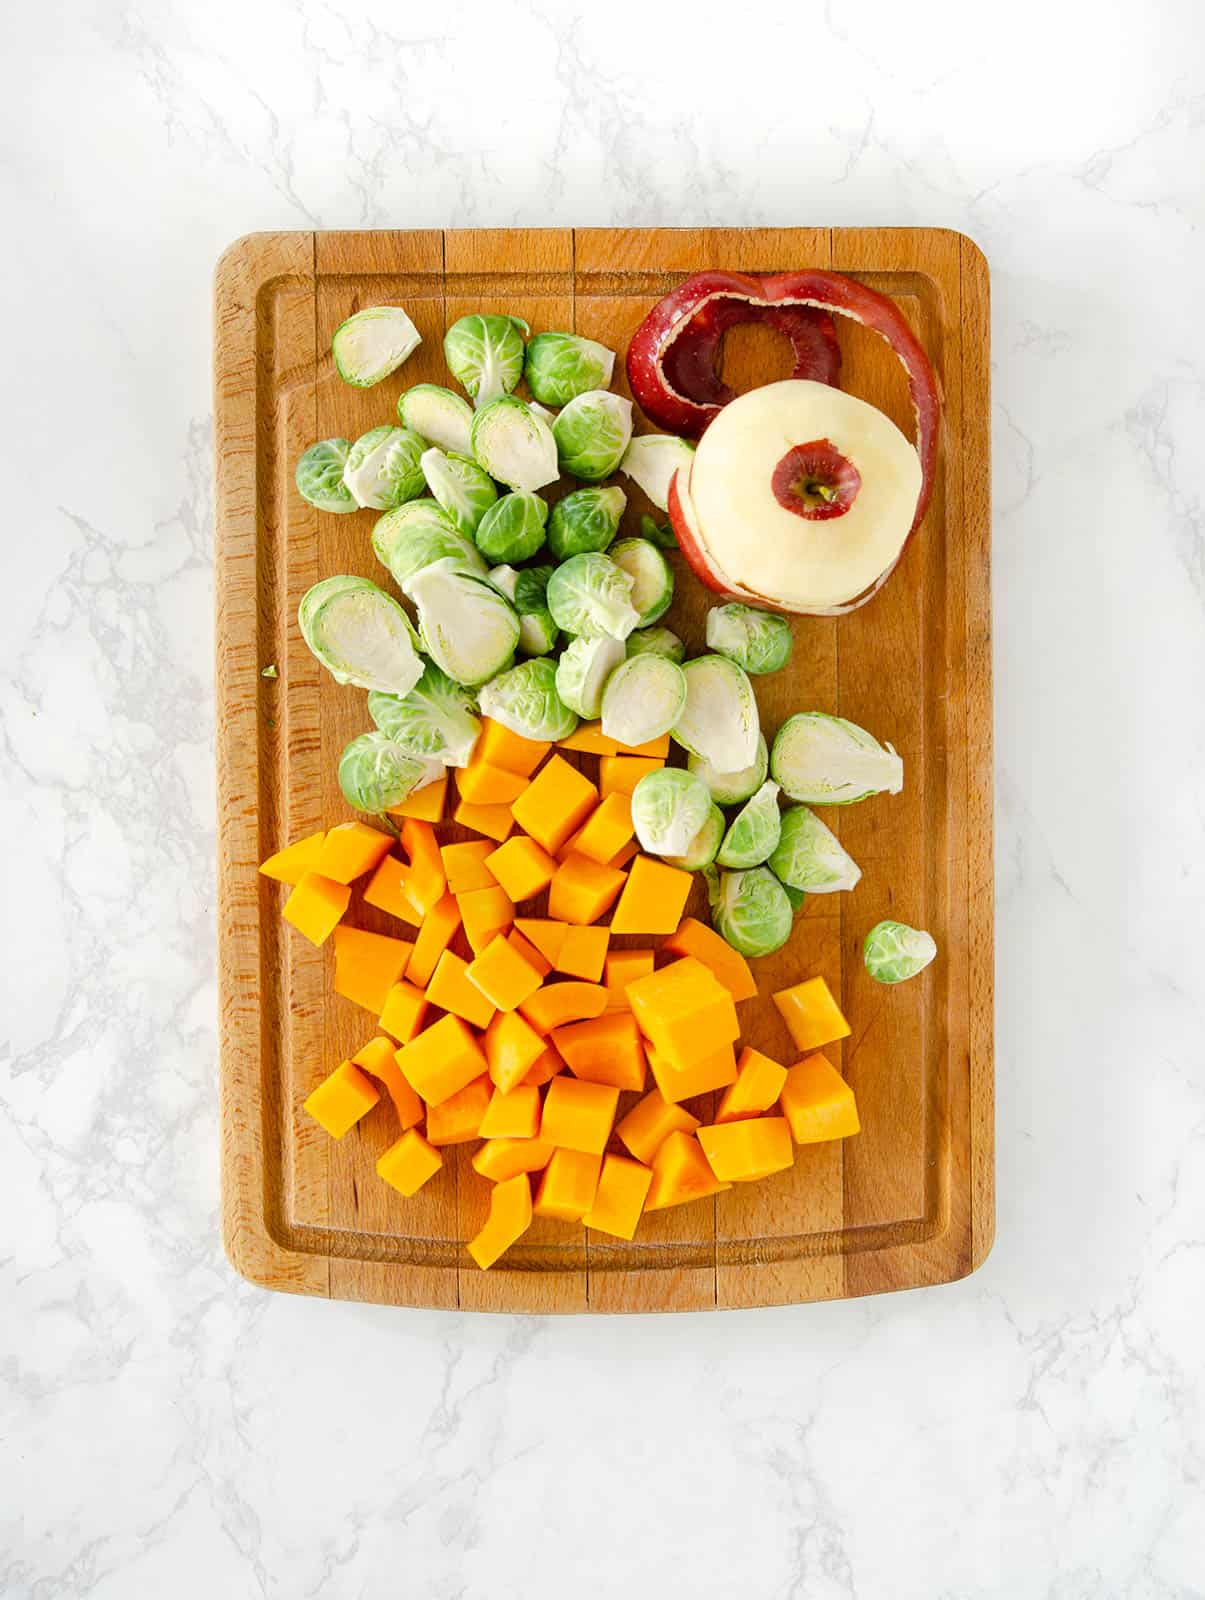 Chopped butternut squash, sliced Brussels sprouts, and peeled apple on cutting board.